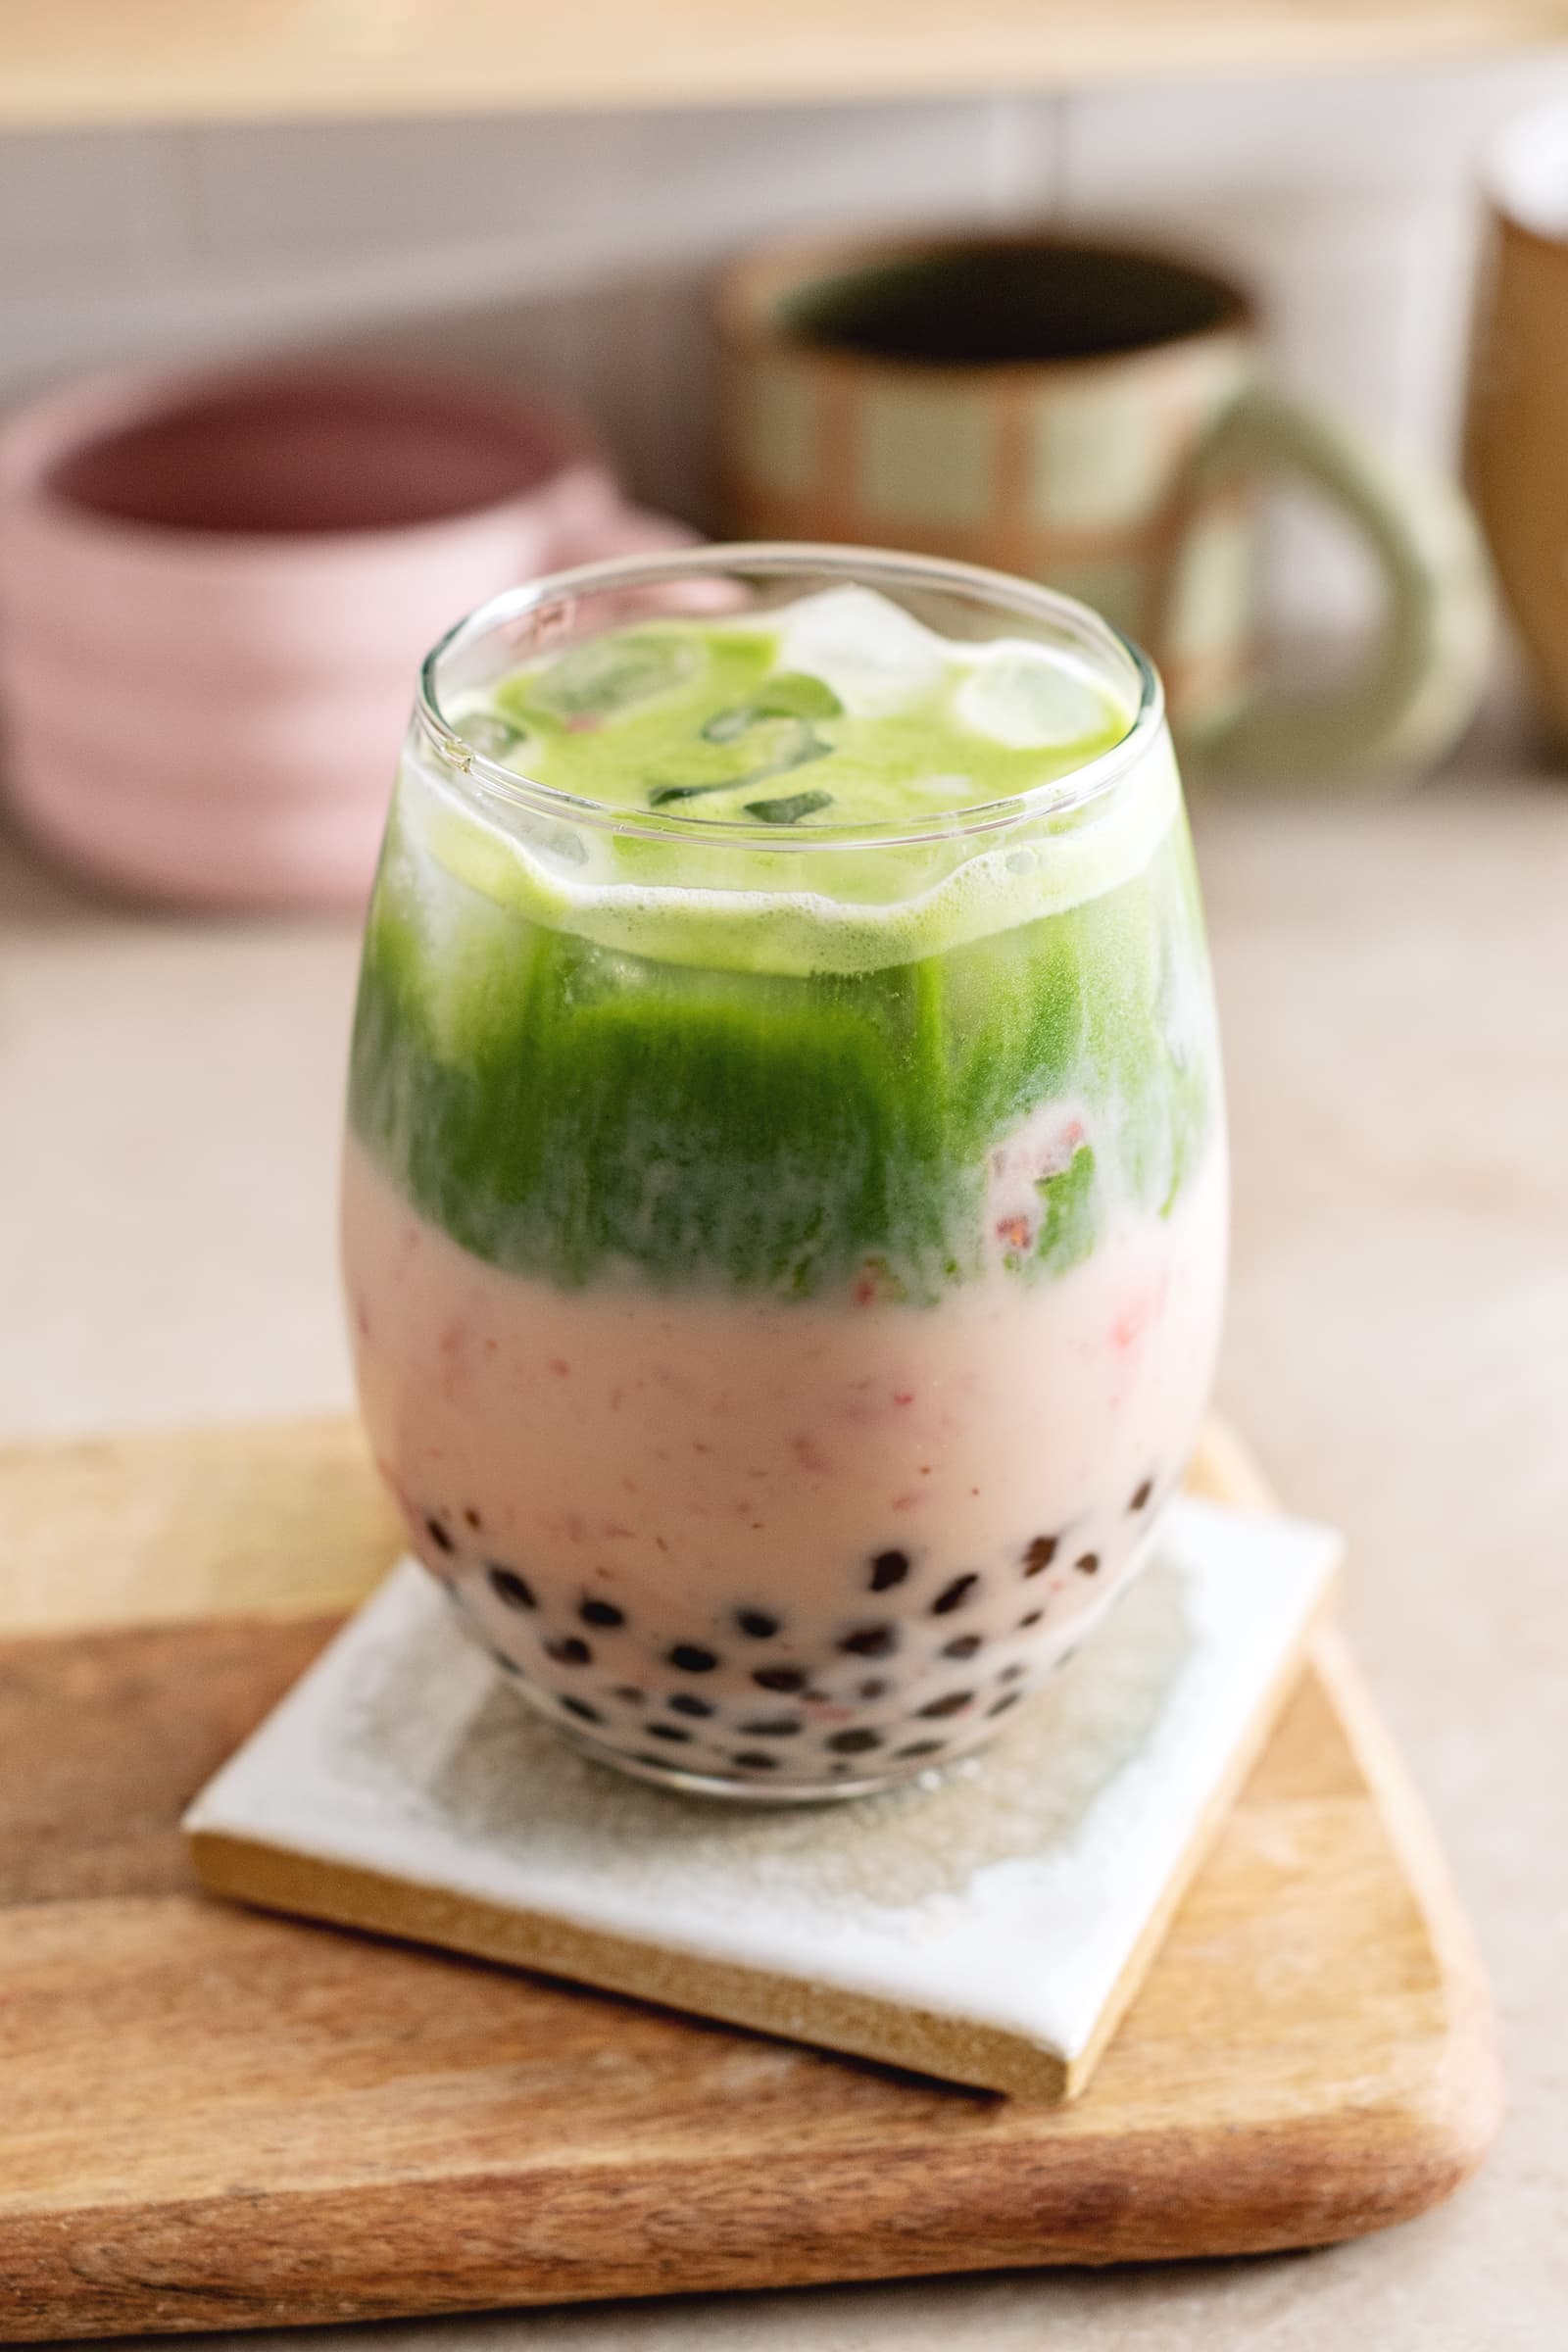 Glass filled with boba pearls, strawberry milk, and matcha split into two layers.